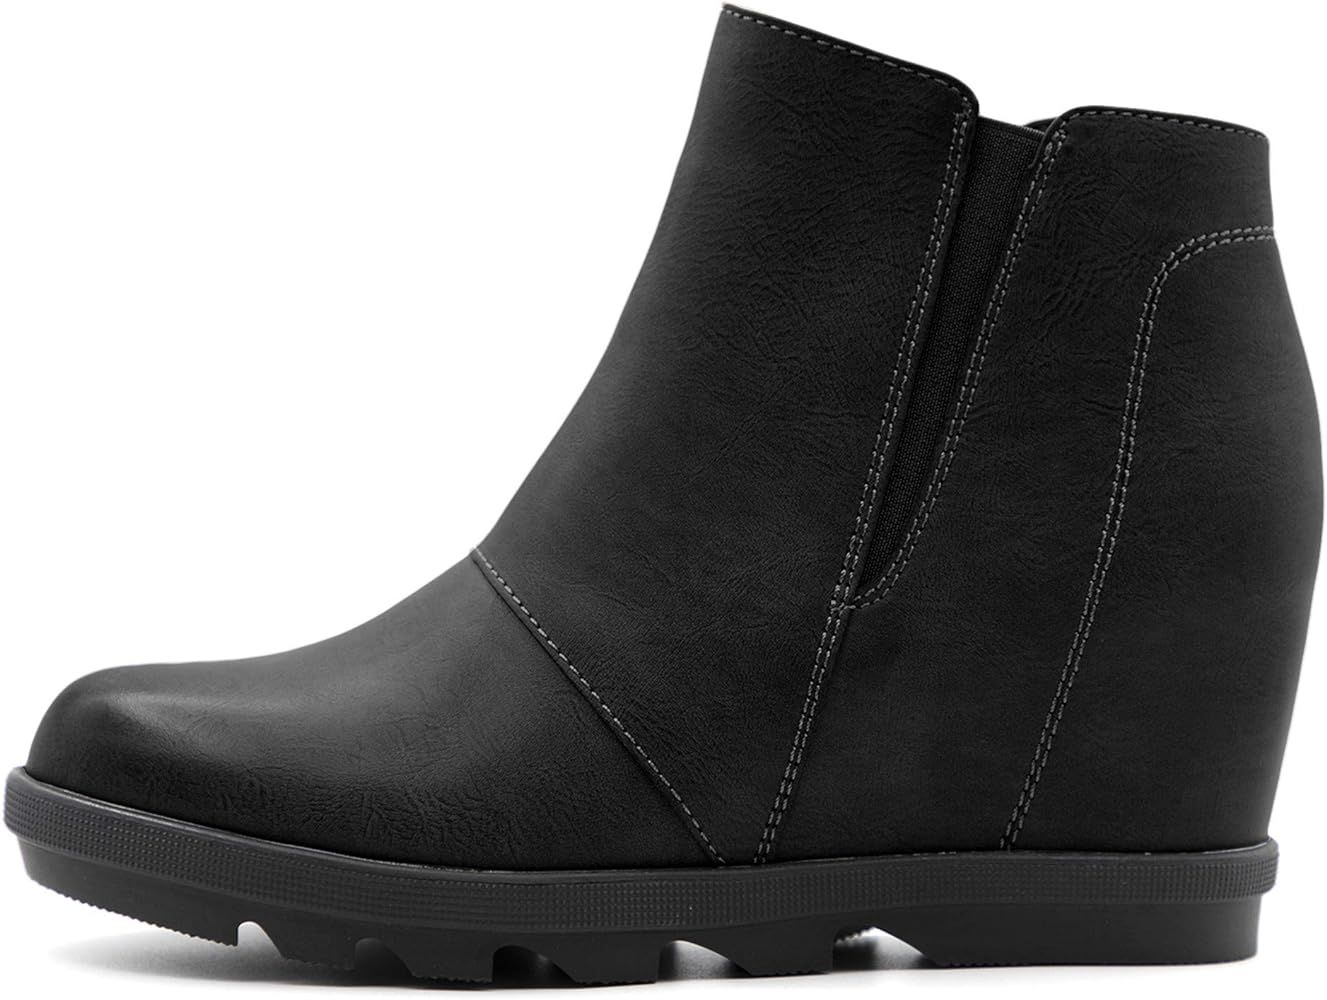 Athlefit Wedge Booties for Women with Heel Hidden Wedge Boots Ankle Boots Wedge Booties | Amazon (US)